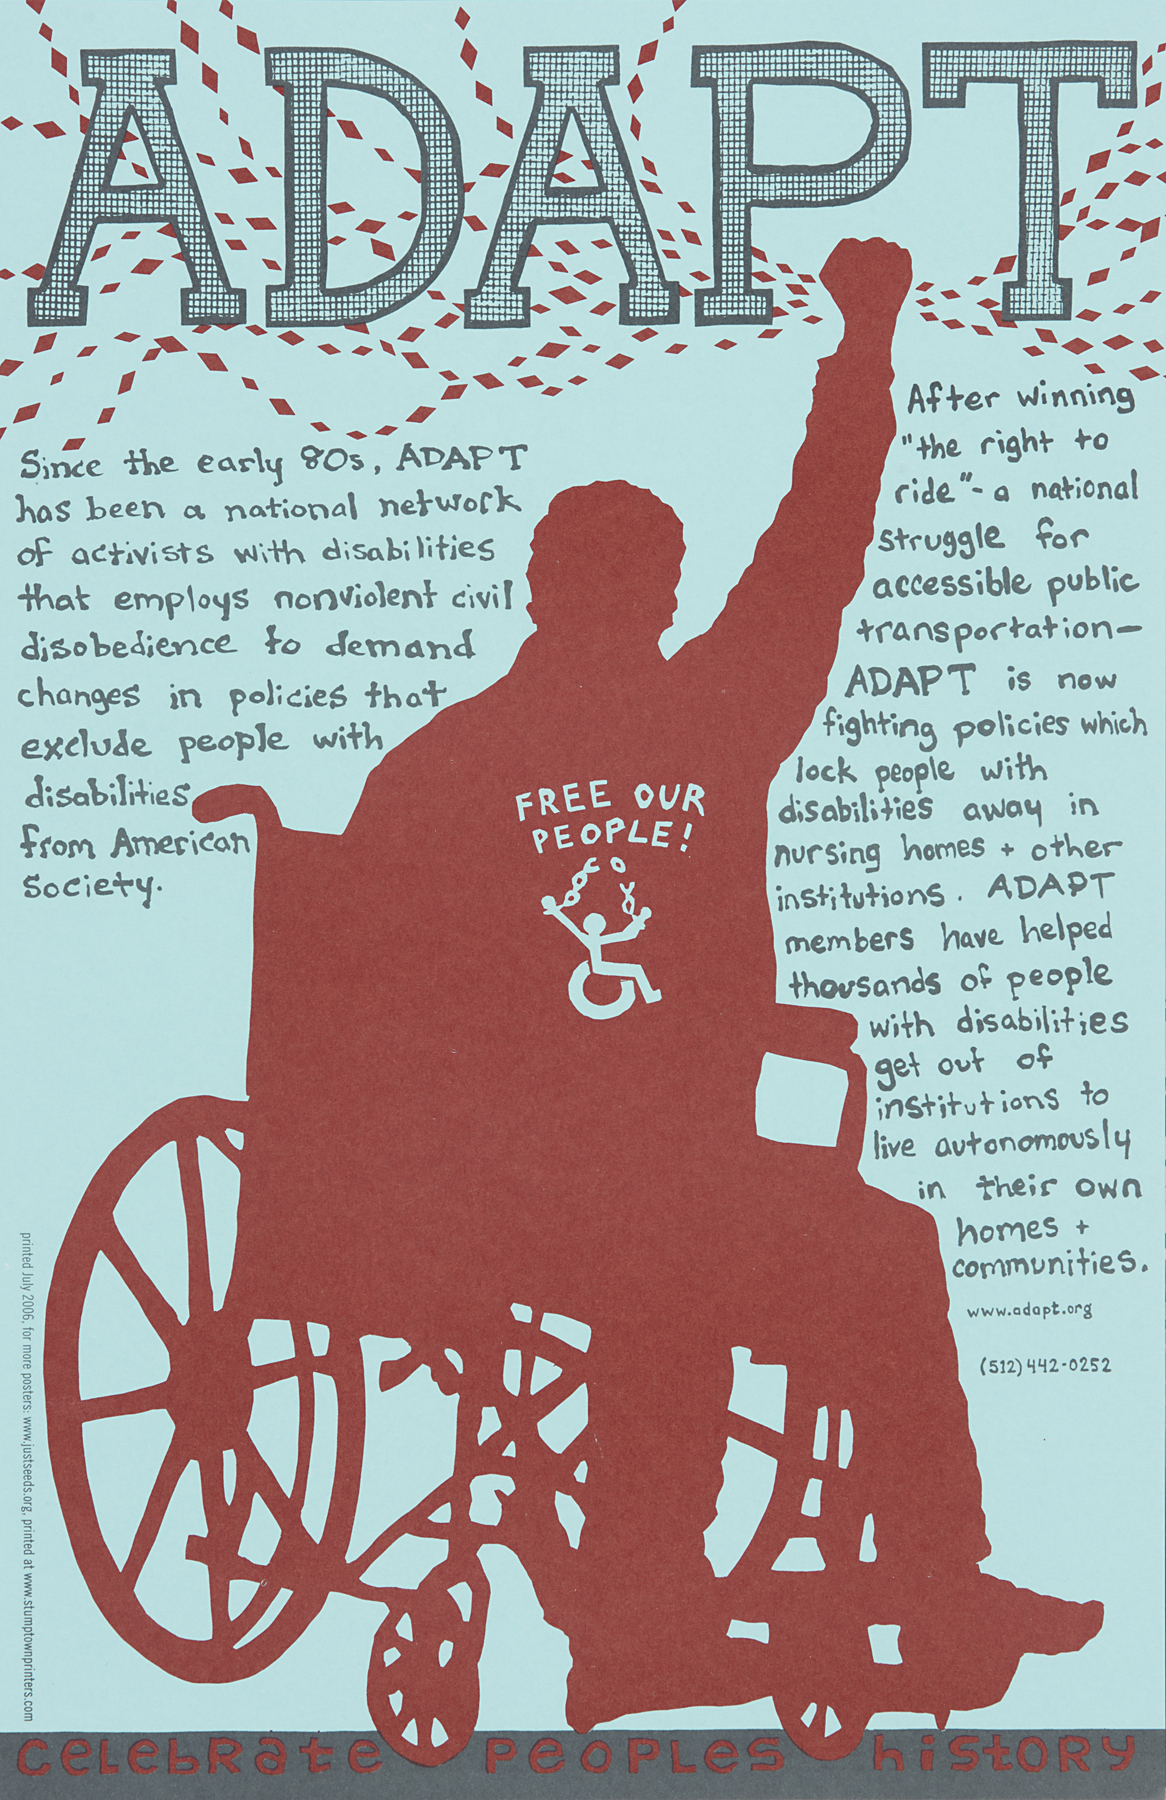 Image depicting silhouette of person in wheelchair with fist raised, executed in blue and orange. Descriptive text integrated into the composition on either side of the figure. Text describes the actions of ADAPT, a network of activists with disabilities that utilizes peaceful protests to call for changes in policies which exclude those with disabilities.